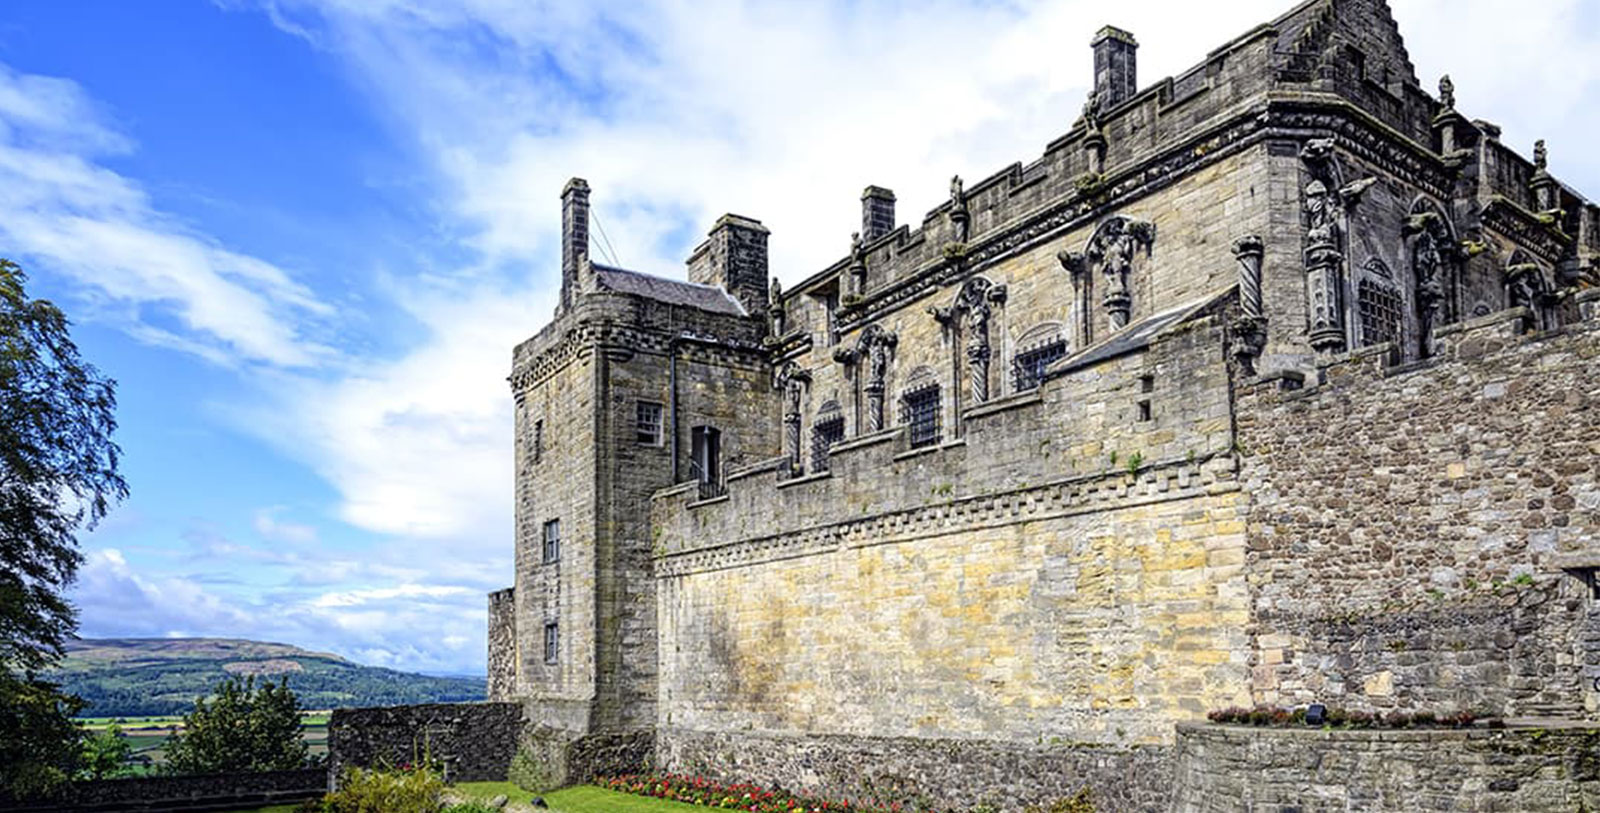 Explore Stirling Castle nearby.